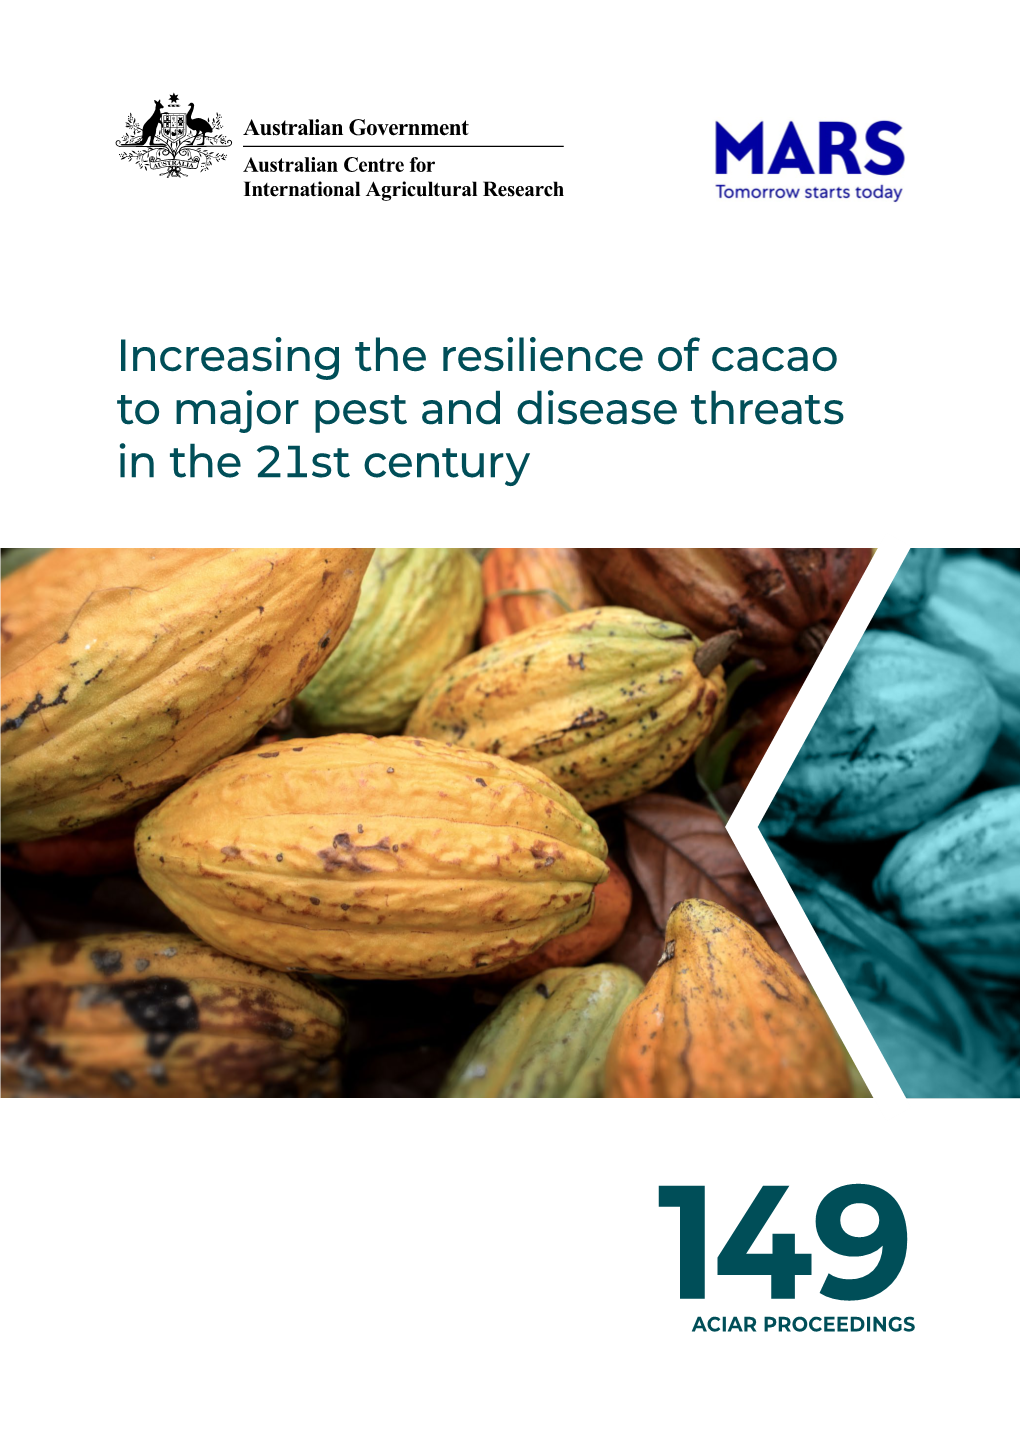 Increasing the Resilience of Cacao to Major Pest and Disease Threats in the 21St Century